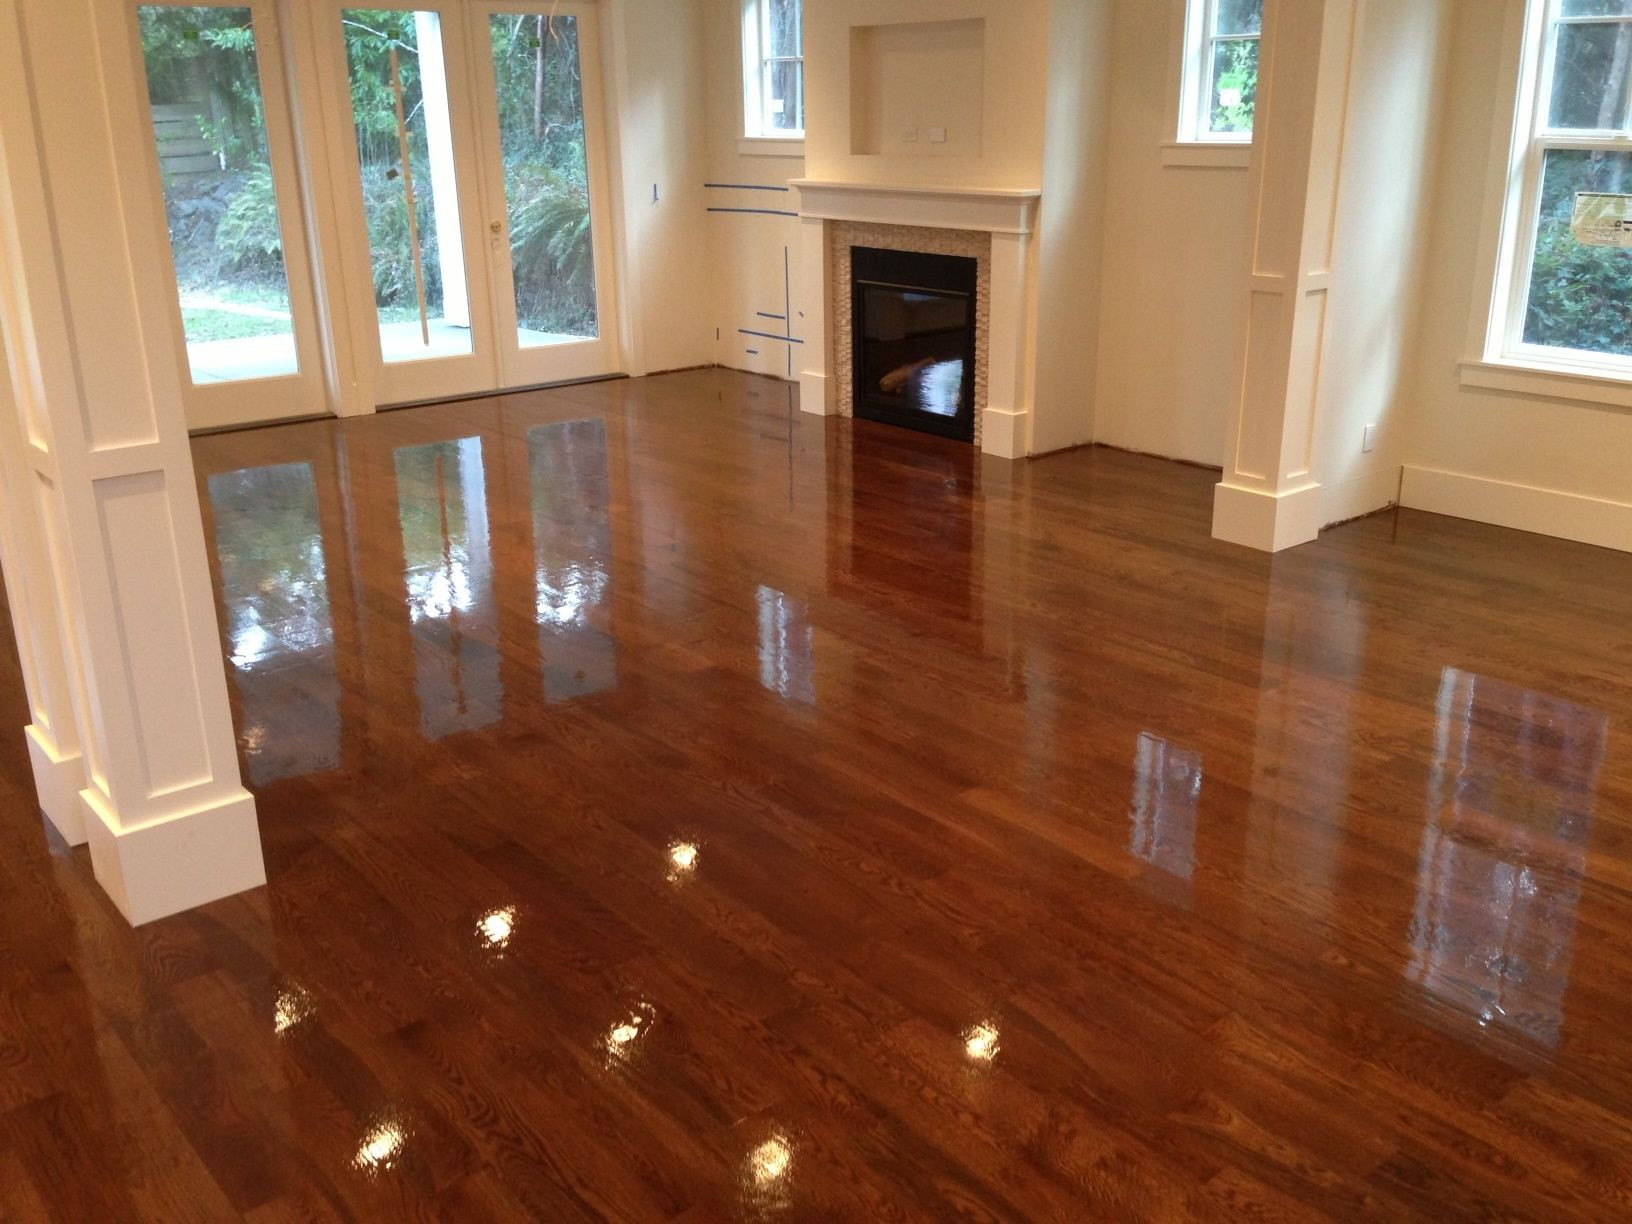 21 Unique Hardwood Floor Refinishing 2024 free download hardwood floor refinishing of express flooring has outlets in glendale tucson and all neighboring regarding hardwood floors seattle hardwood floor refinishing and installation seattle tacoma